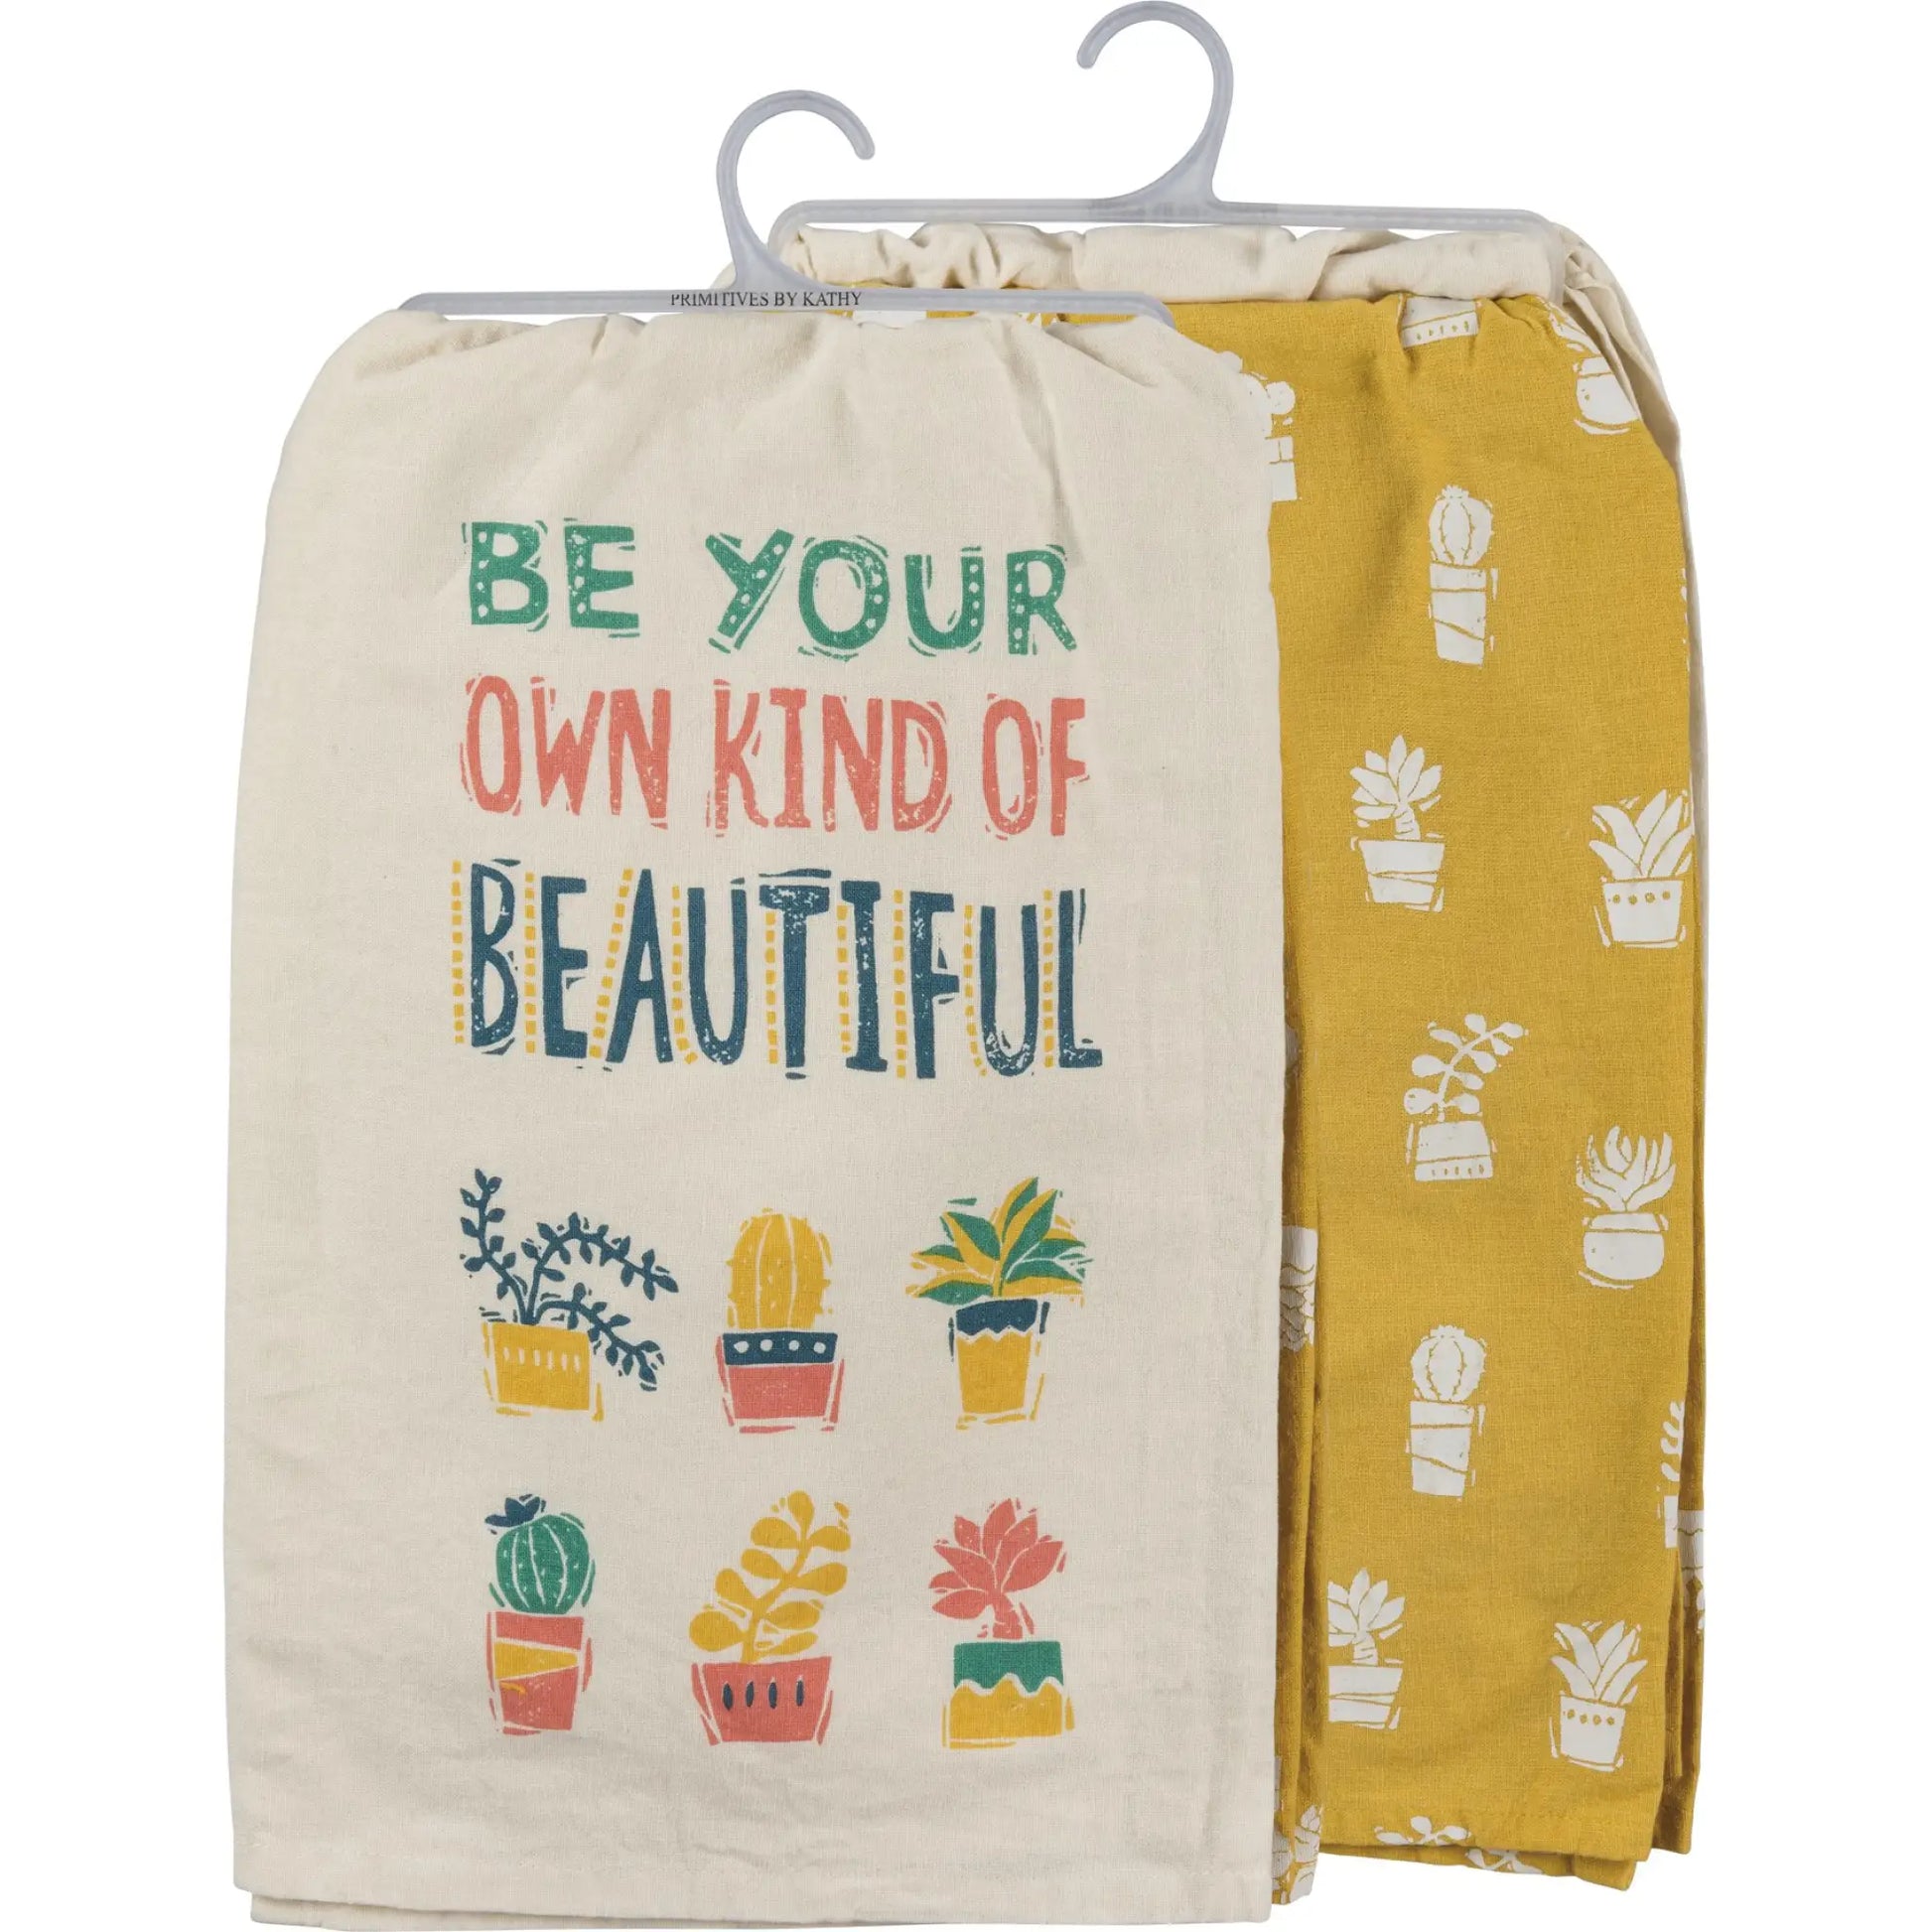 Be Your Own Kind of Beautiful dish towel set - Towel